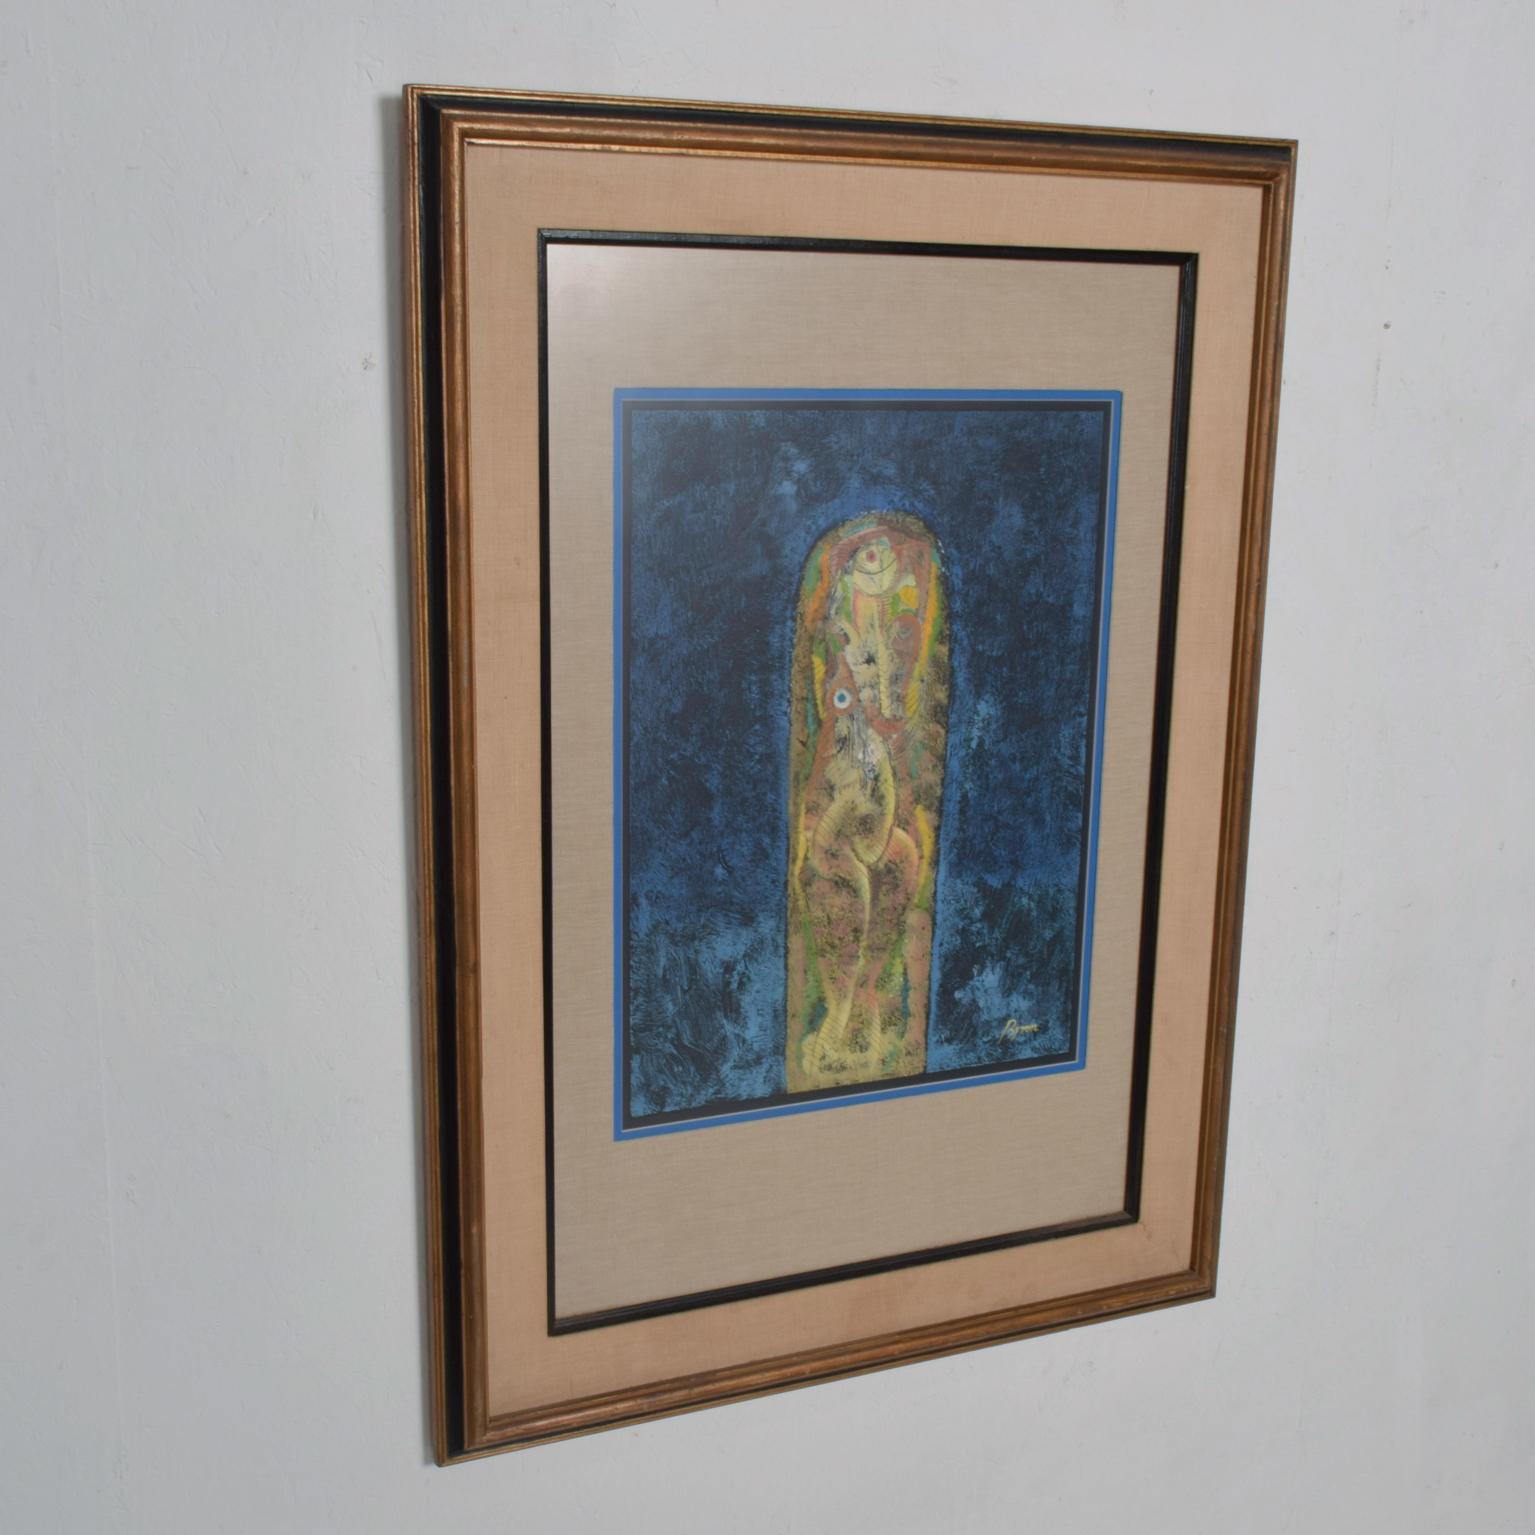 
Byron Galvez, Mexican Artist is known for his painting as well as sculptural work. 
This work is mixed media technique, blue is dominant color. 
32.25W x 44.5 H x 1.5 D, Art 19 x 25H 
Original Preowned Condition. 
Review the images.